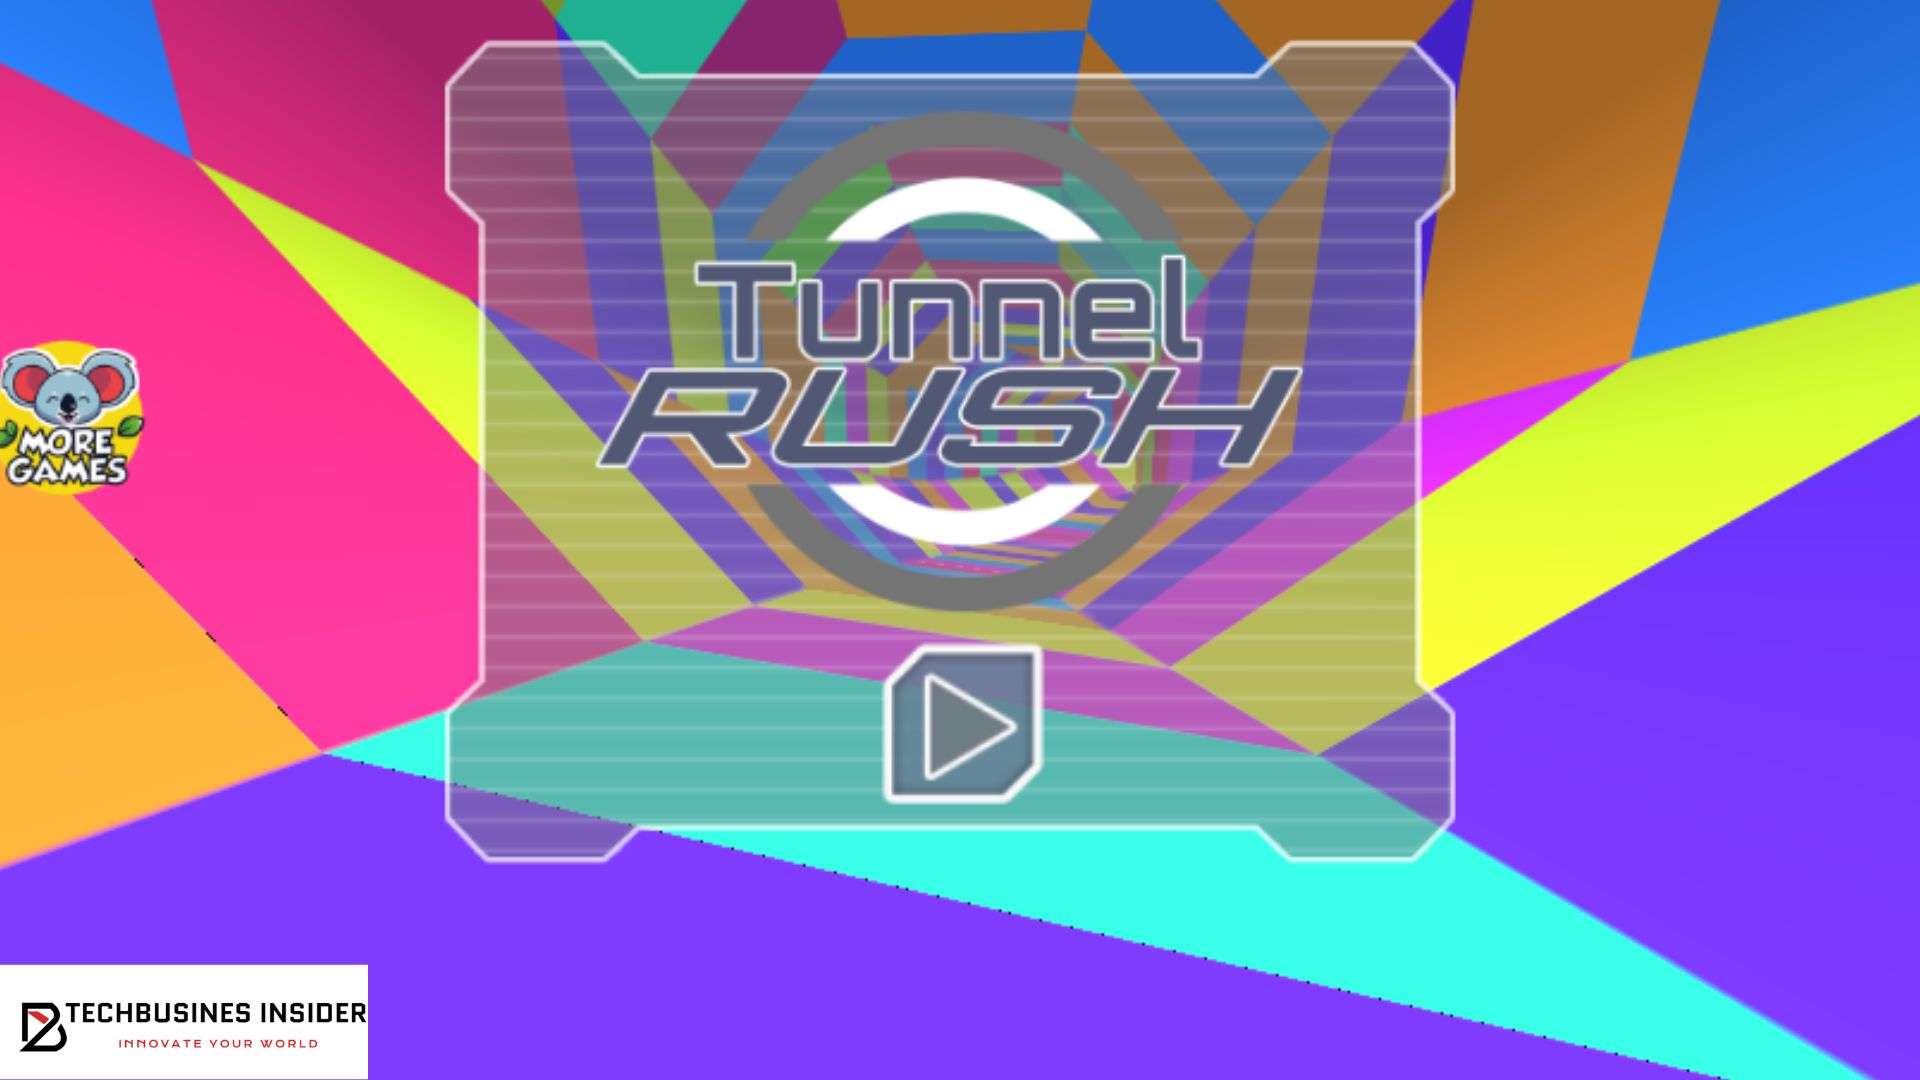 The reason behind the tunnel rush’s popularity.